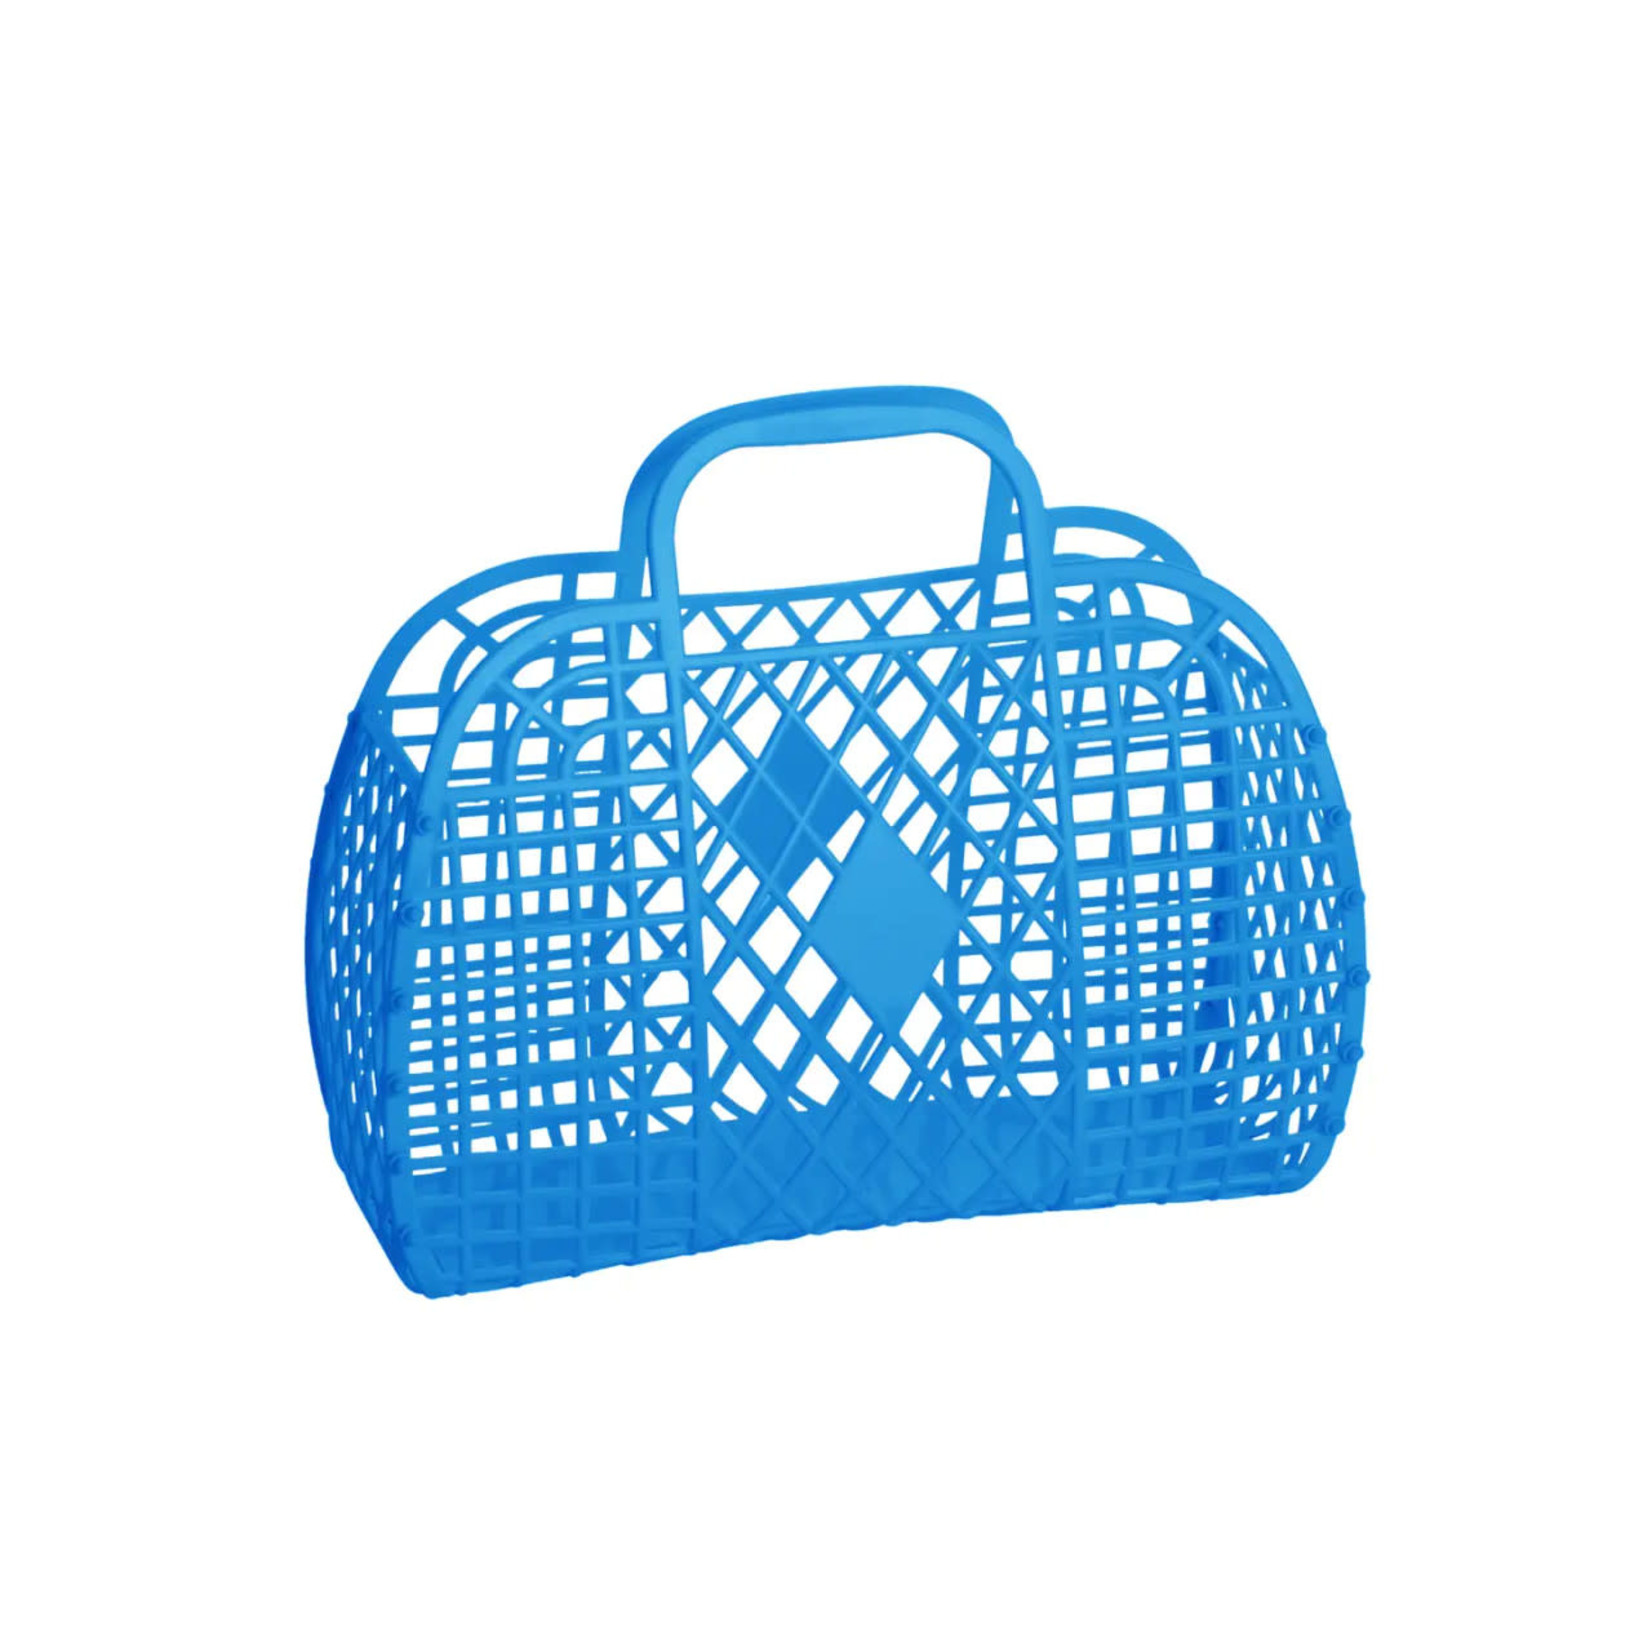 Sun Jellies Retro Basket - Small Royal Blue (pick up only)